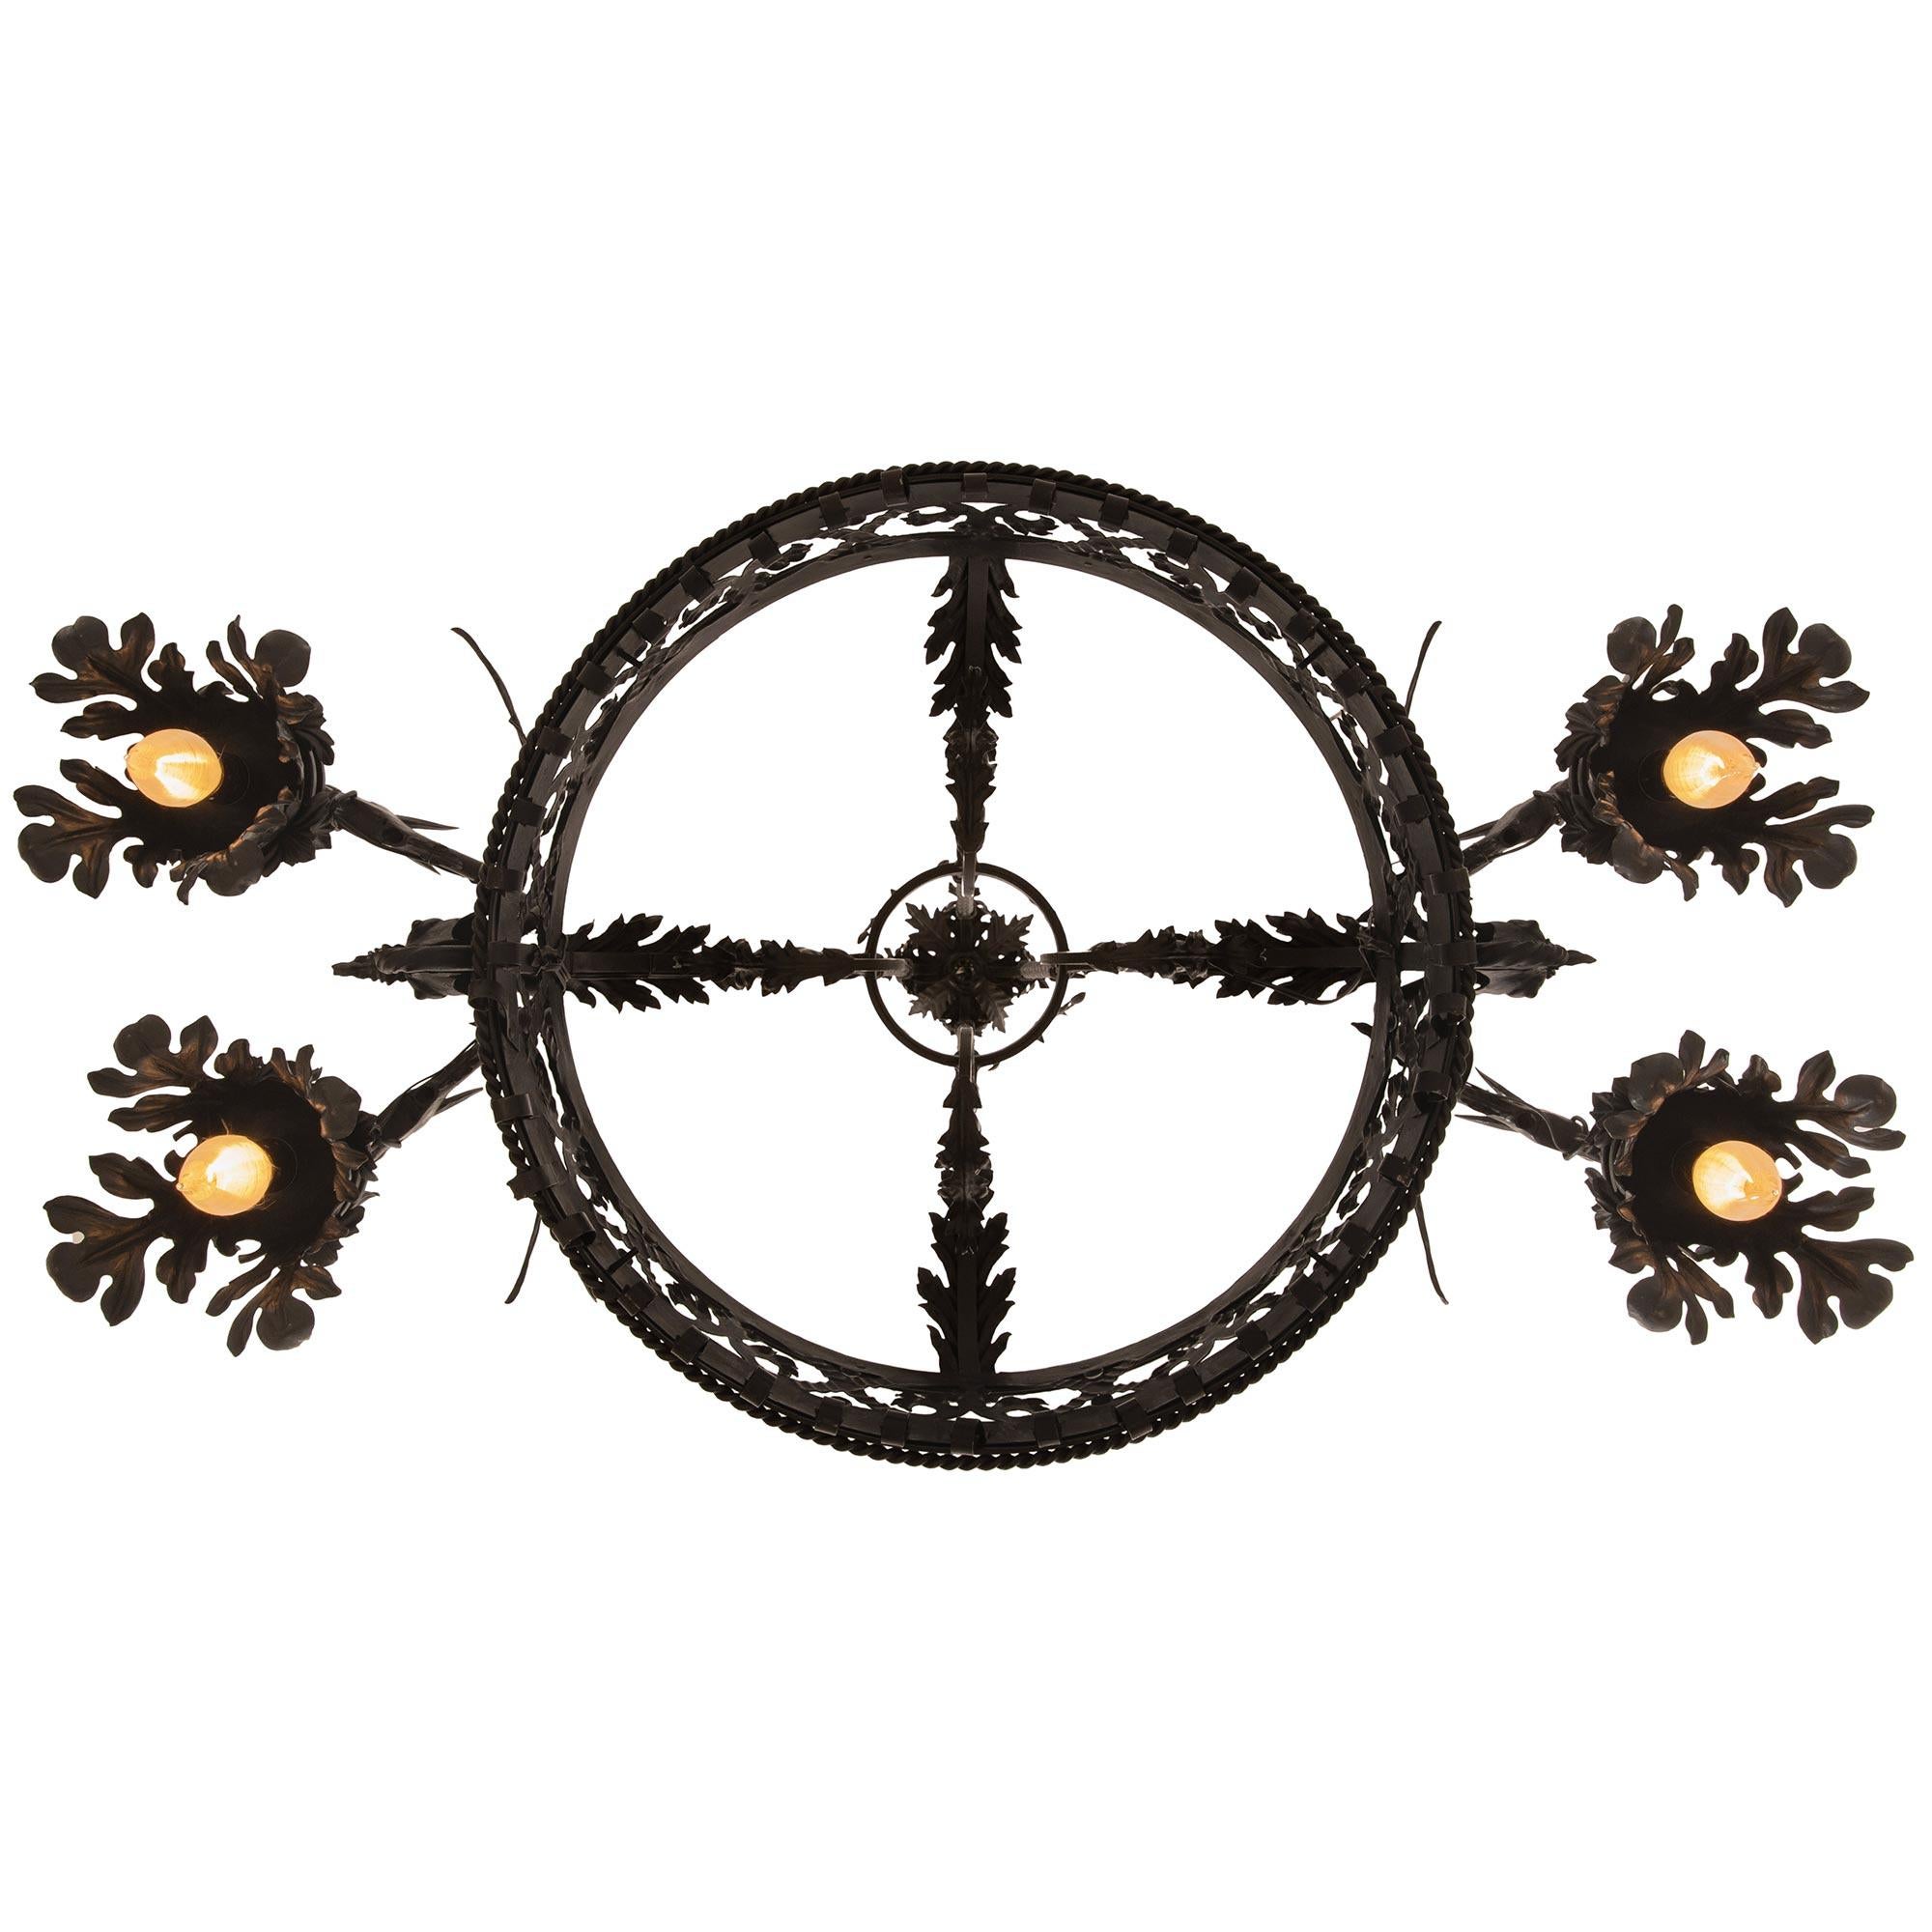 An handsome and most unique French 19th century Renaissance st. Wrought Iron chandelier. The chandelier is centered by a stunning central cage with Wrought Iron scrolls at the bottom before a smooth studded band below the pierced center displaying